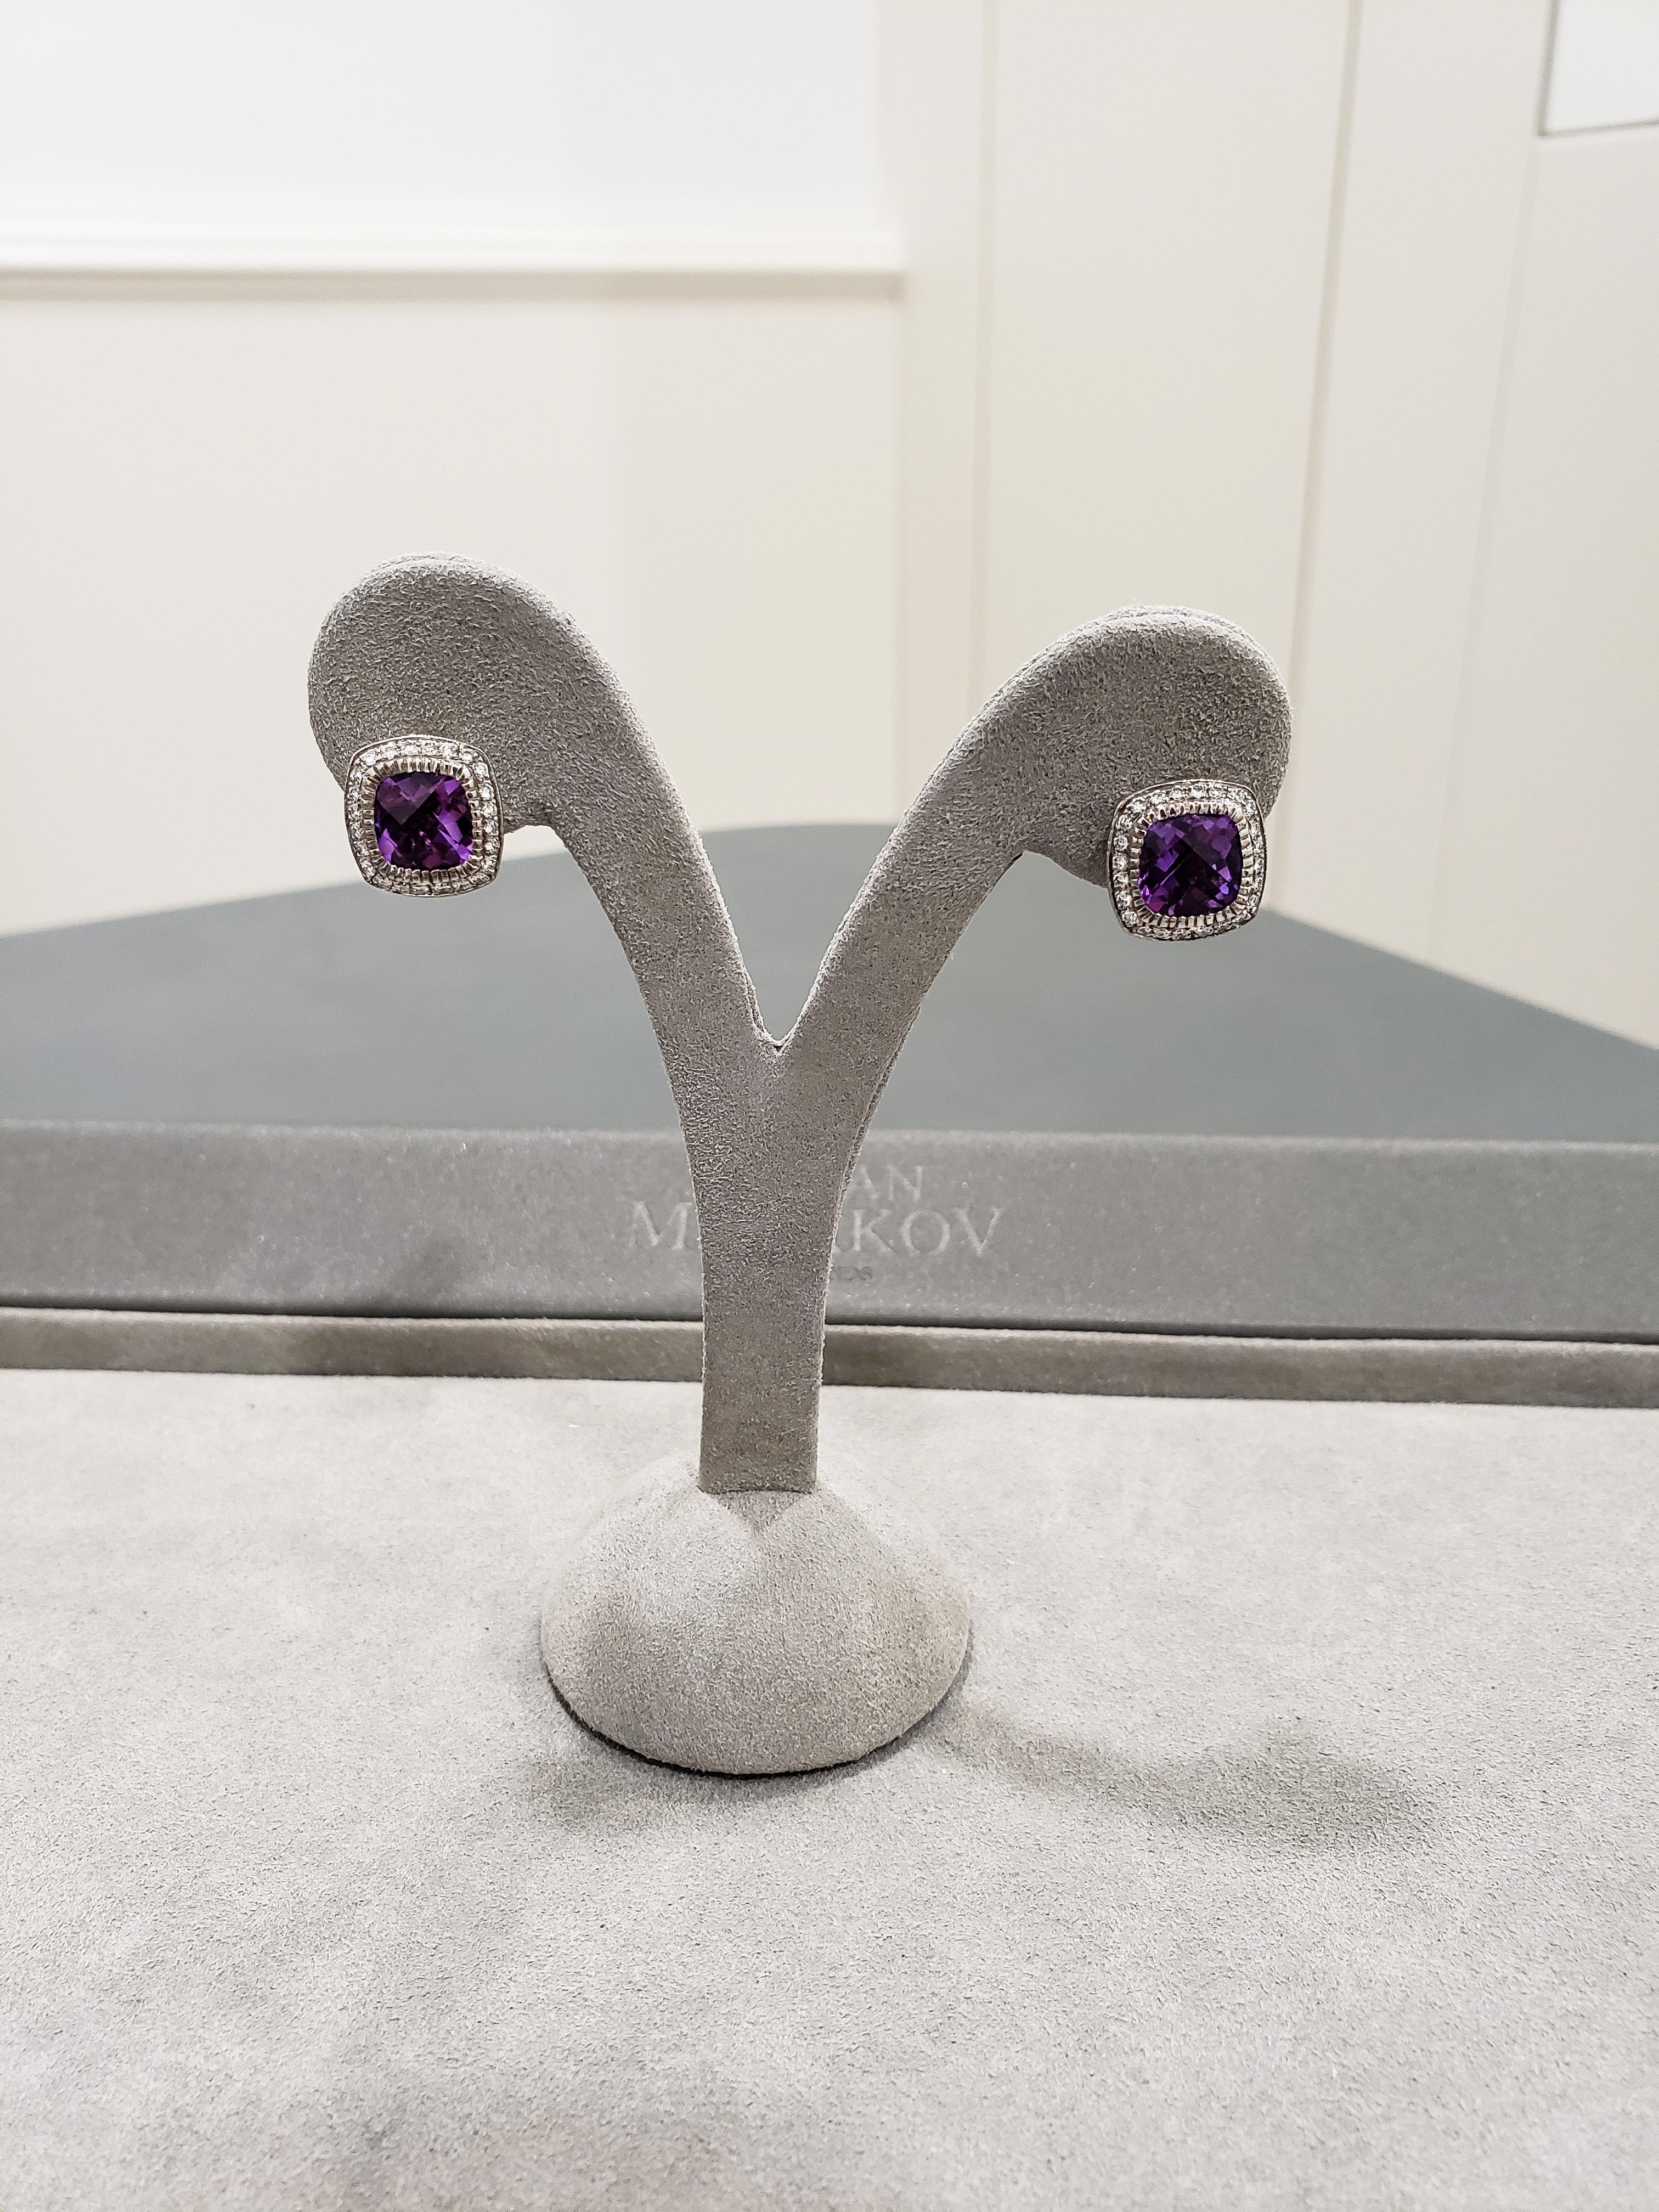 Vintage style earrings showcasing color-rich cushion cut amethysts, surrounded by a single row of round diamonds. Finished with milgrain edges. Amethysts weigh 3.81 carats total; diamonds weigh 0.30 carats total. Made in 14 karat white gold.

Style